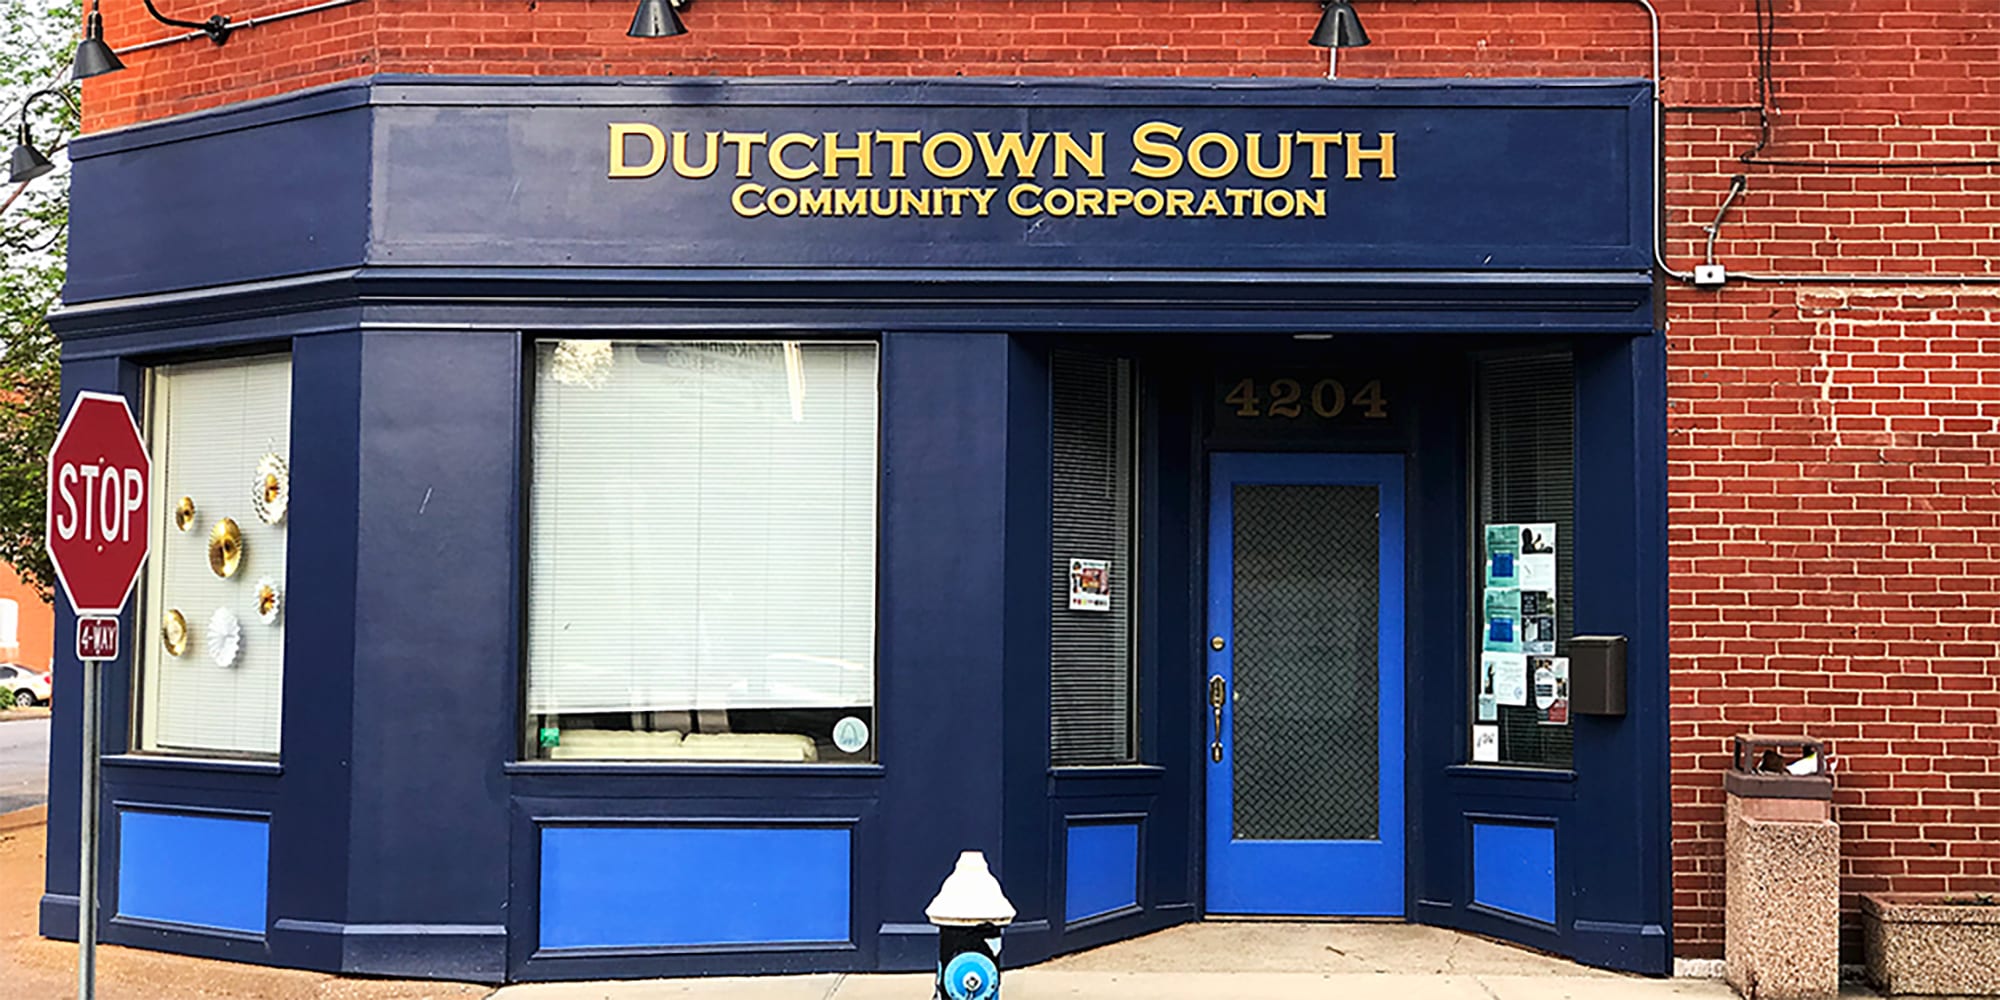 Dutchtown South Community Corporation's office at Virginia and Meramec.